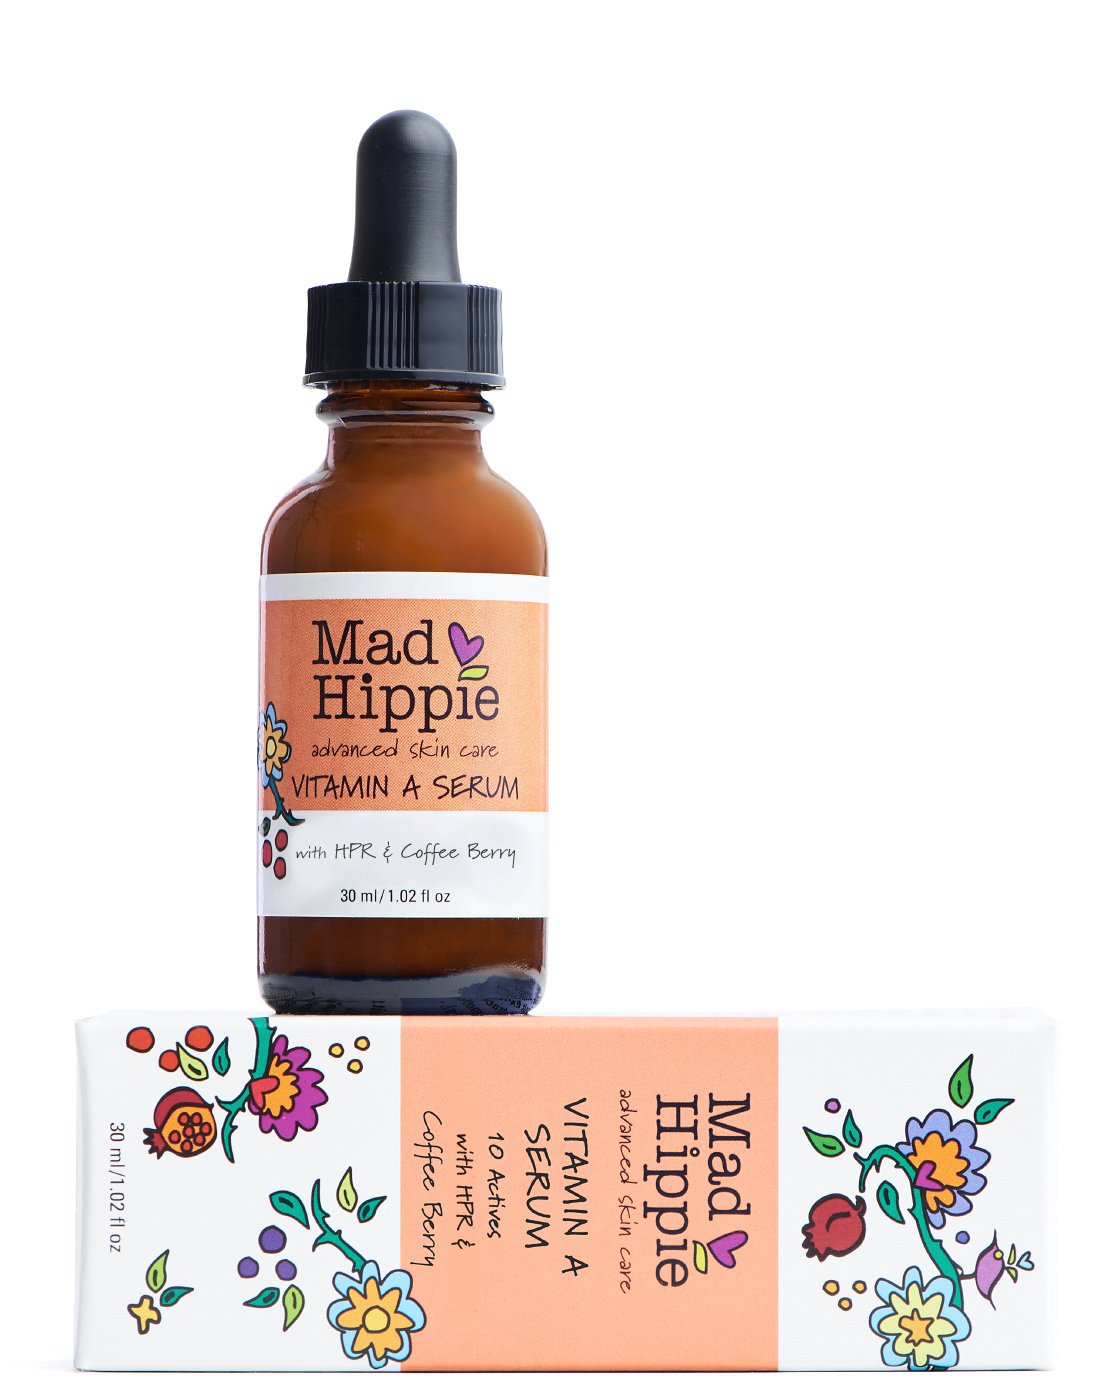 Mad Hippie - Main Product Images - Vitamin A Serum .jpg